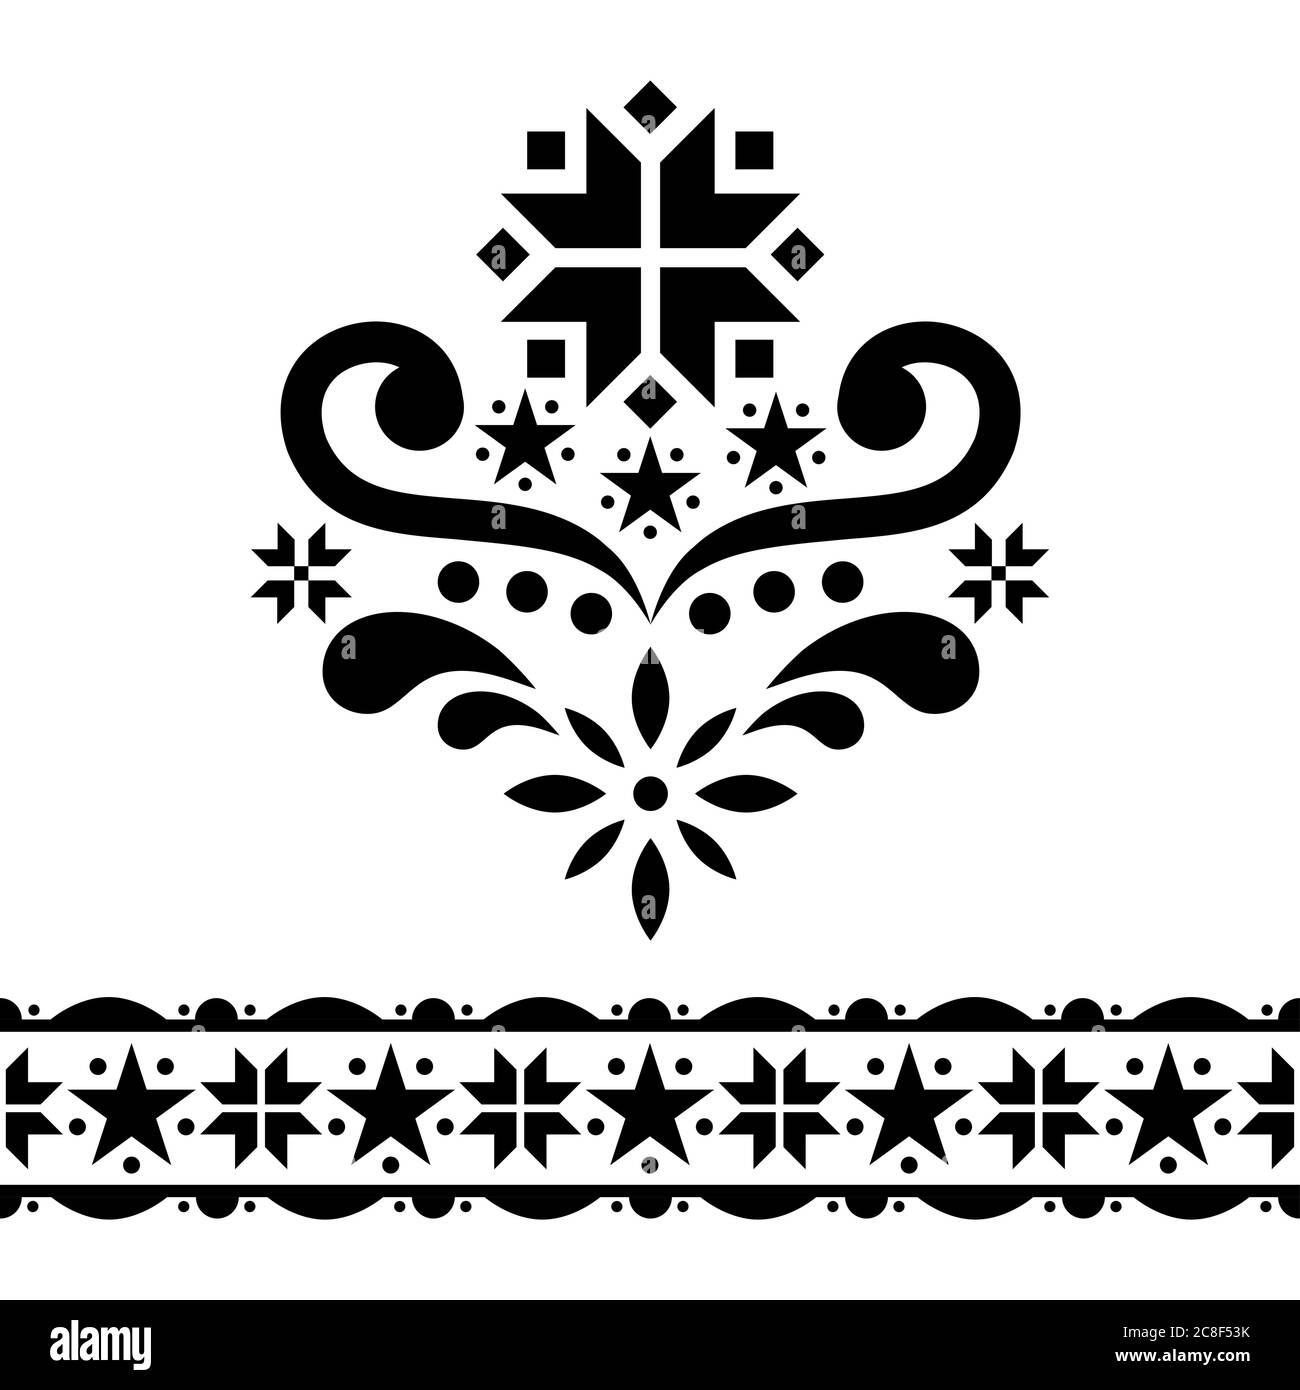 Scandinavian Chrirstmas folk art vector design set - single patterns collection, cute floral ornament with flowers and snowflakes in black on white ba Stock Vector